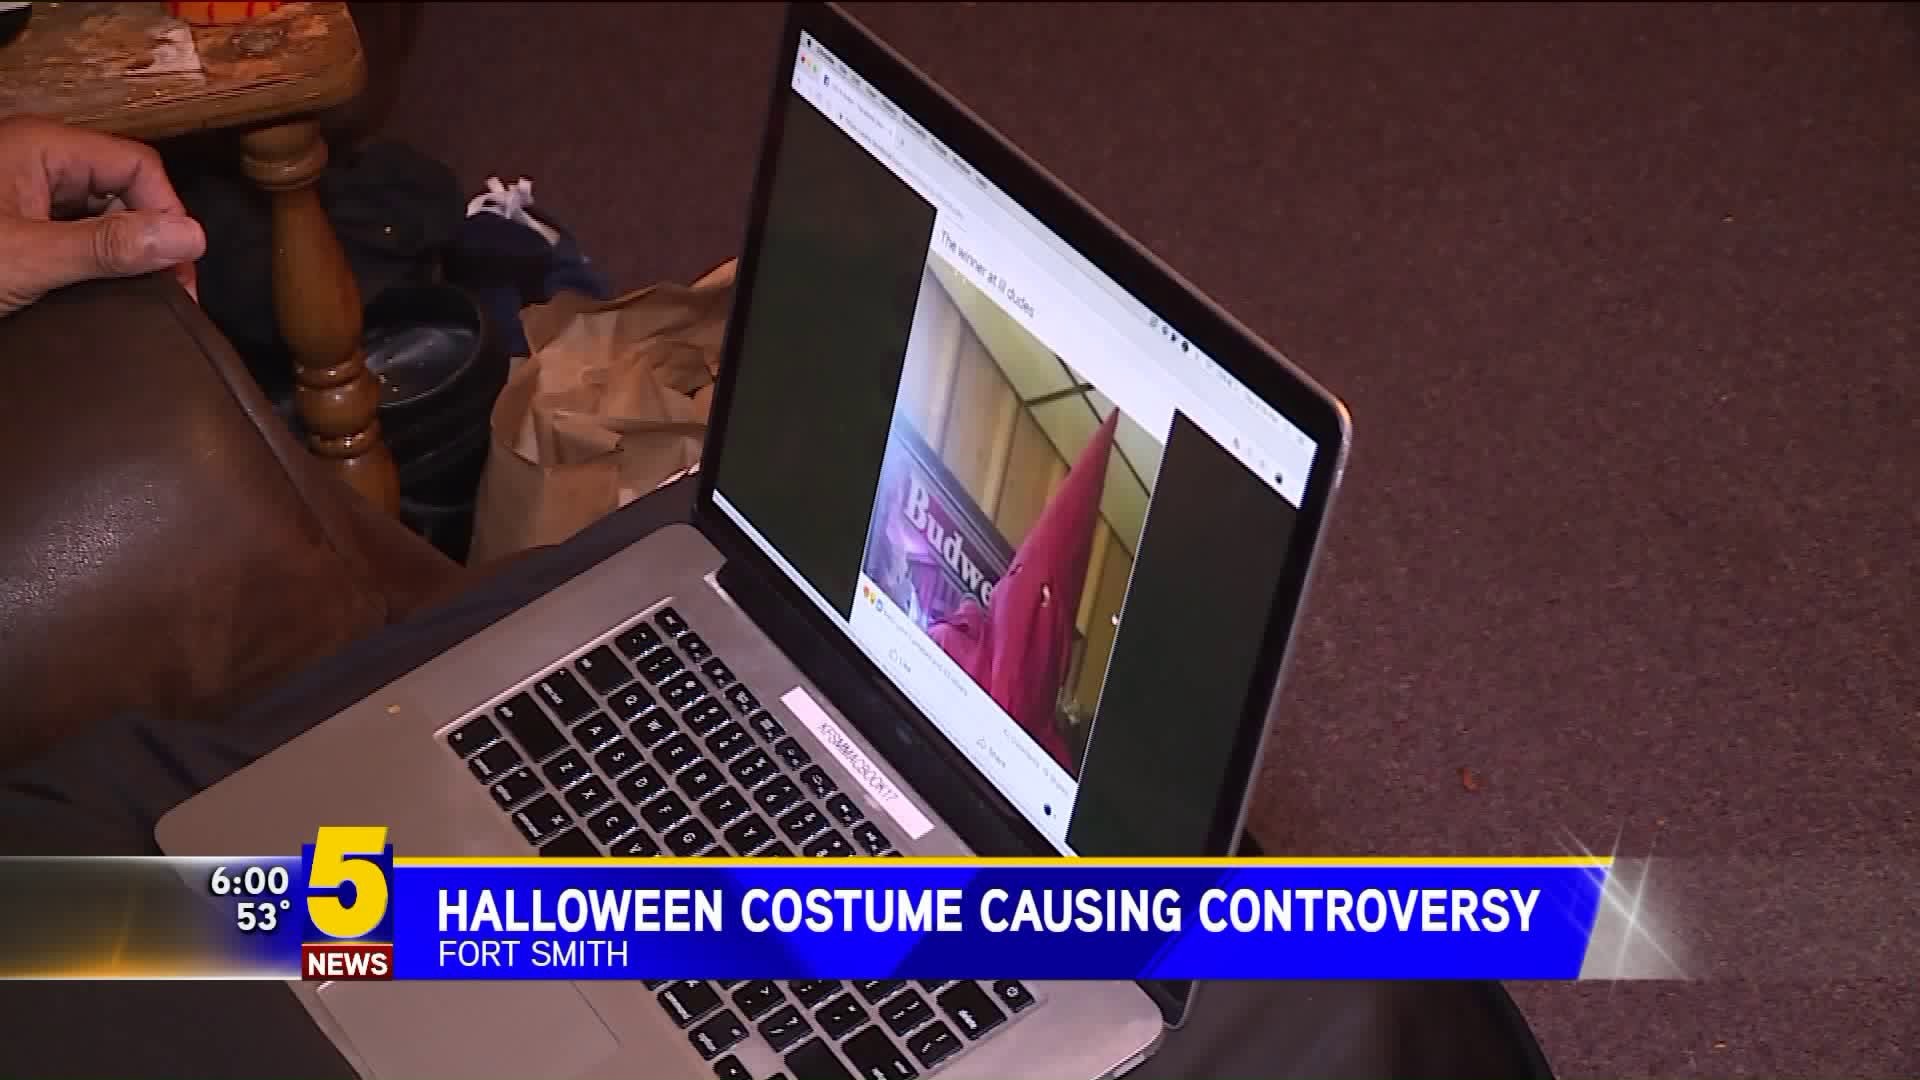 Halloween Costume Contest Winner Causing Controversy Online